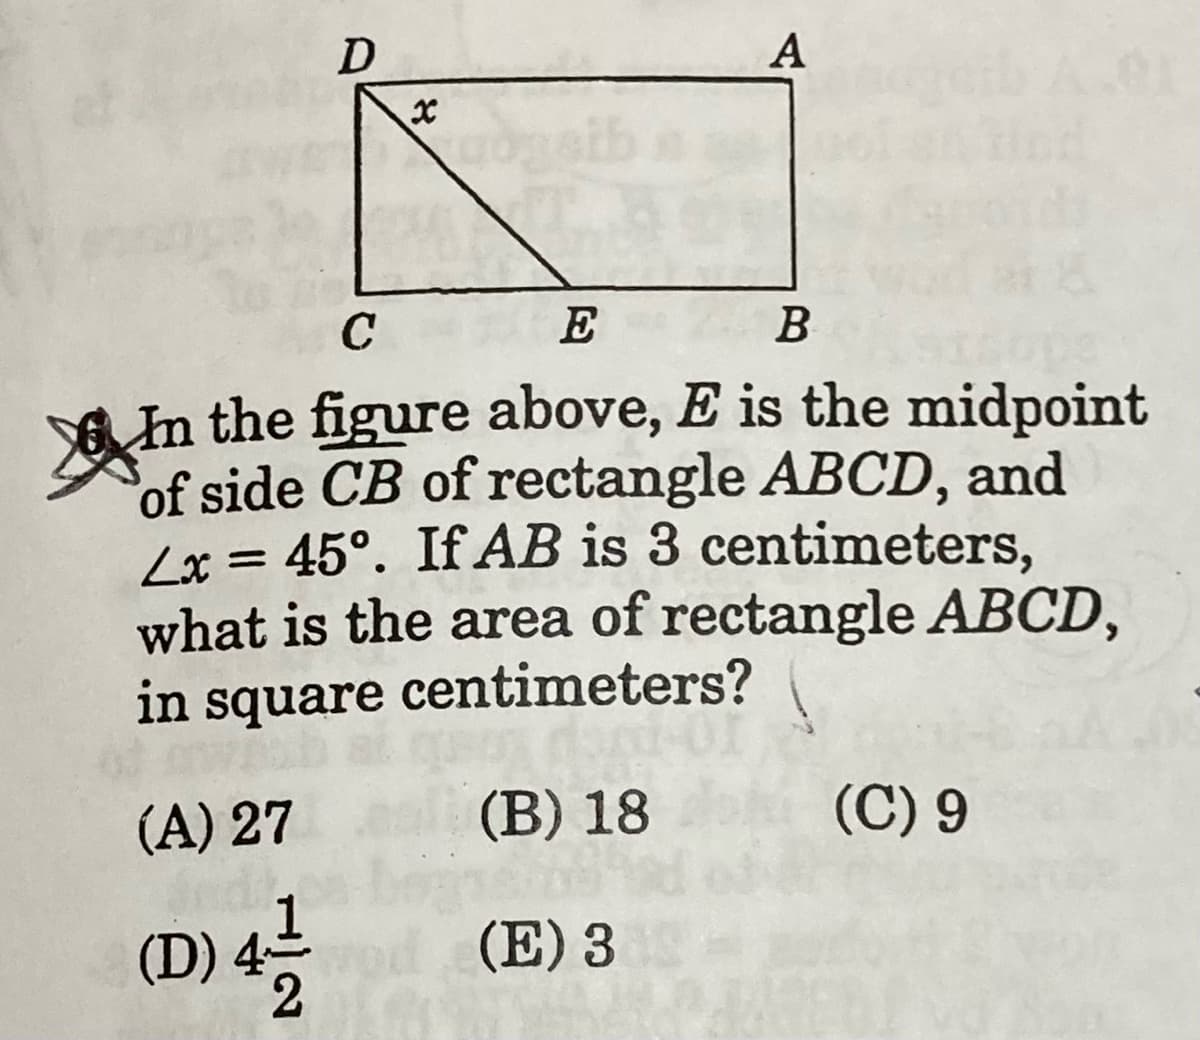 D
А
C
E
B
In the figure above, E is the midpoint
of side CB of rectangle ABCD, and
Lx = 45°. If AB is 3 centimeters,
what is the area of rectangle ABCD,
in square centimeters?
(A) 27
(В) 18
(C) 9
(D) 4
2.
(E) 3
